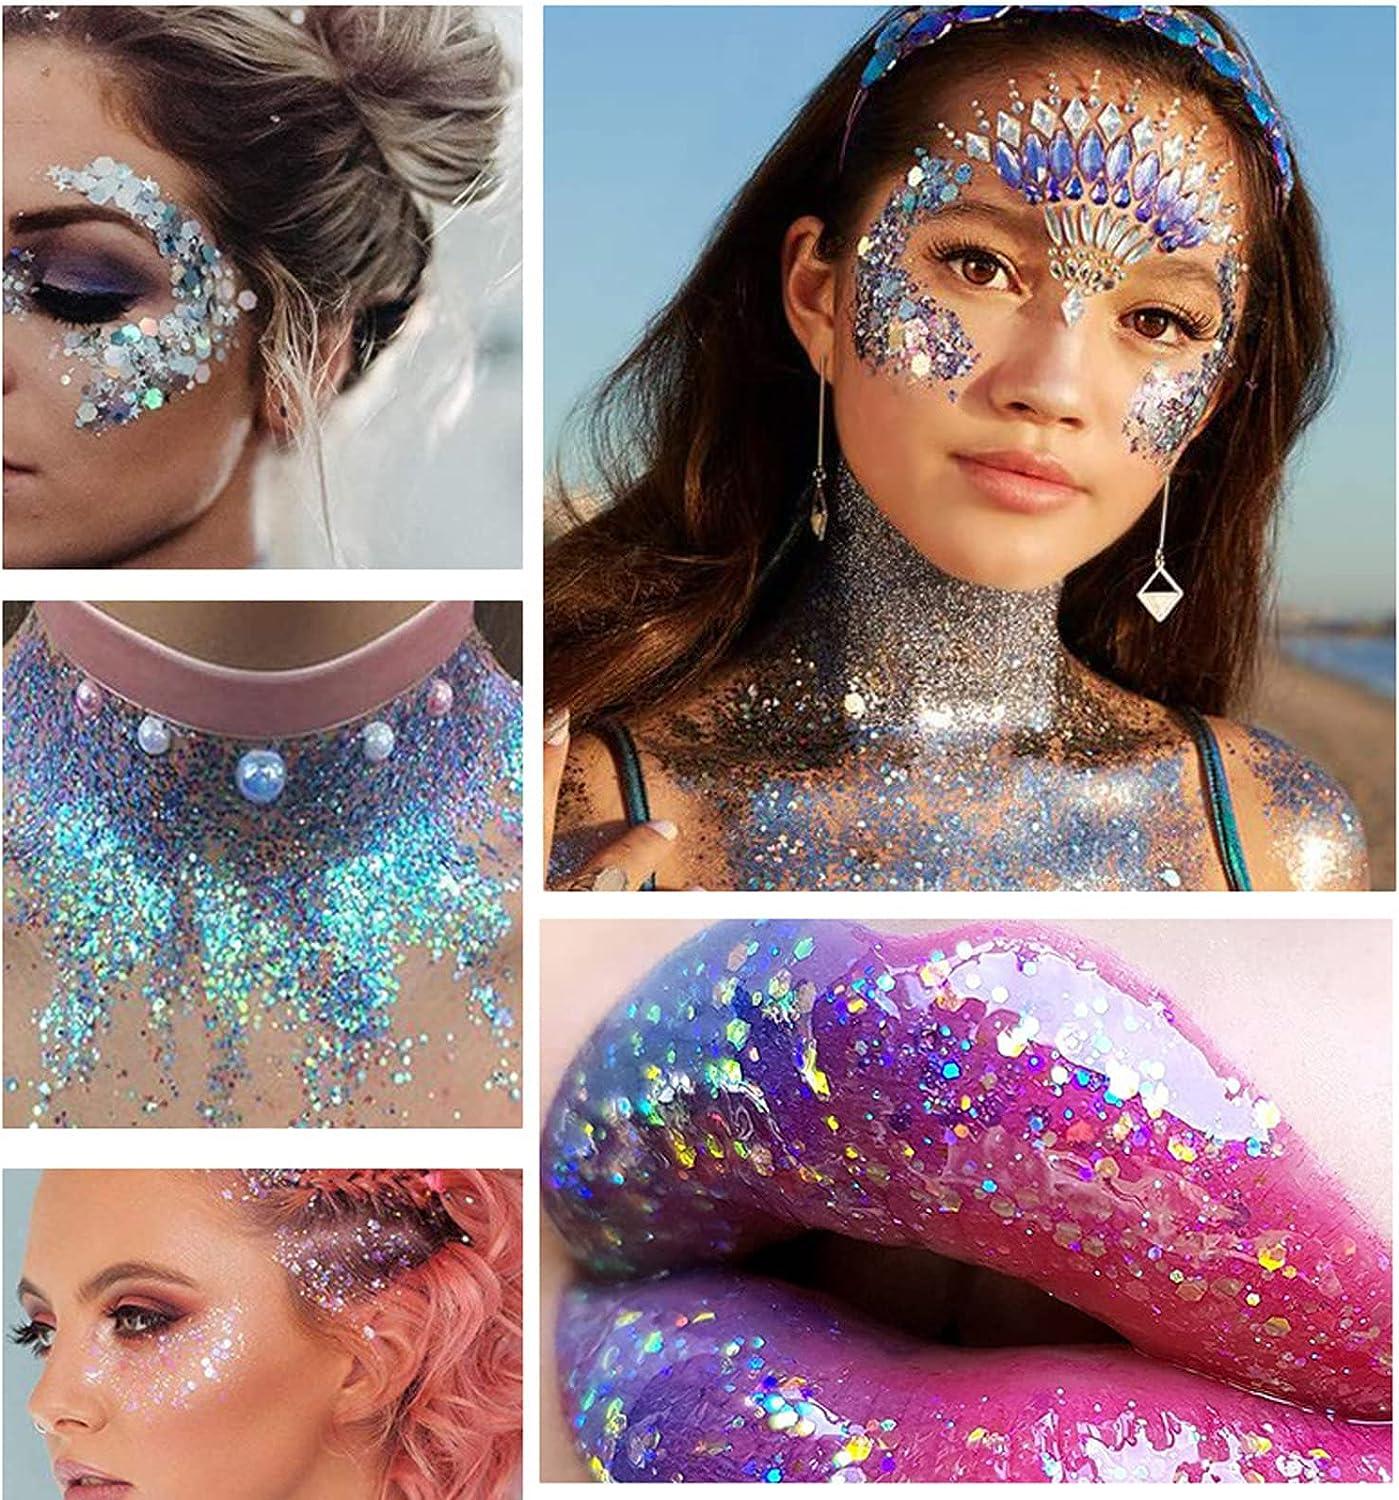 Yeweian White Face Body Glitter Gel Liquid Holographic Chunky Glitter  Singer Concerts Music Festival Rave Accessories Mermaid Lip Eye Nails Hair Body  Glitter Makeup 50g (06 White) 06White